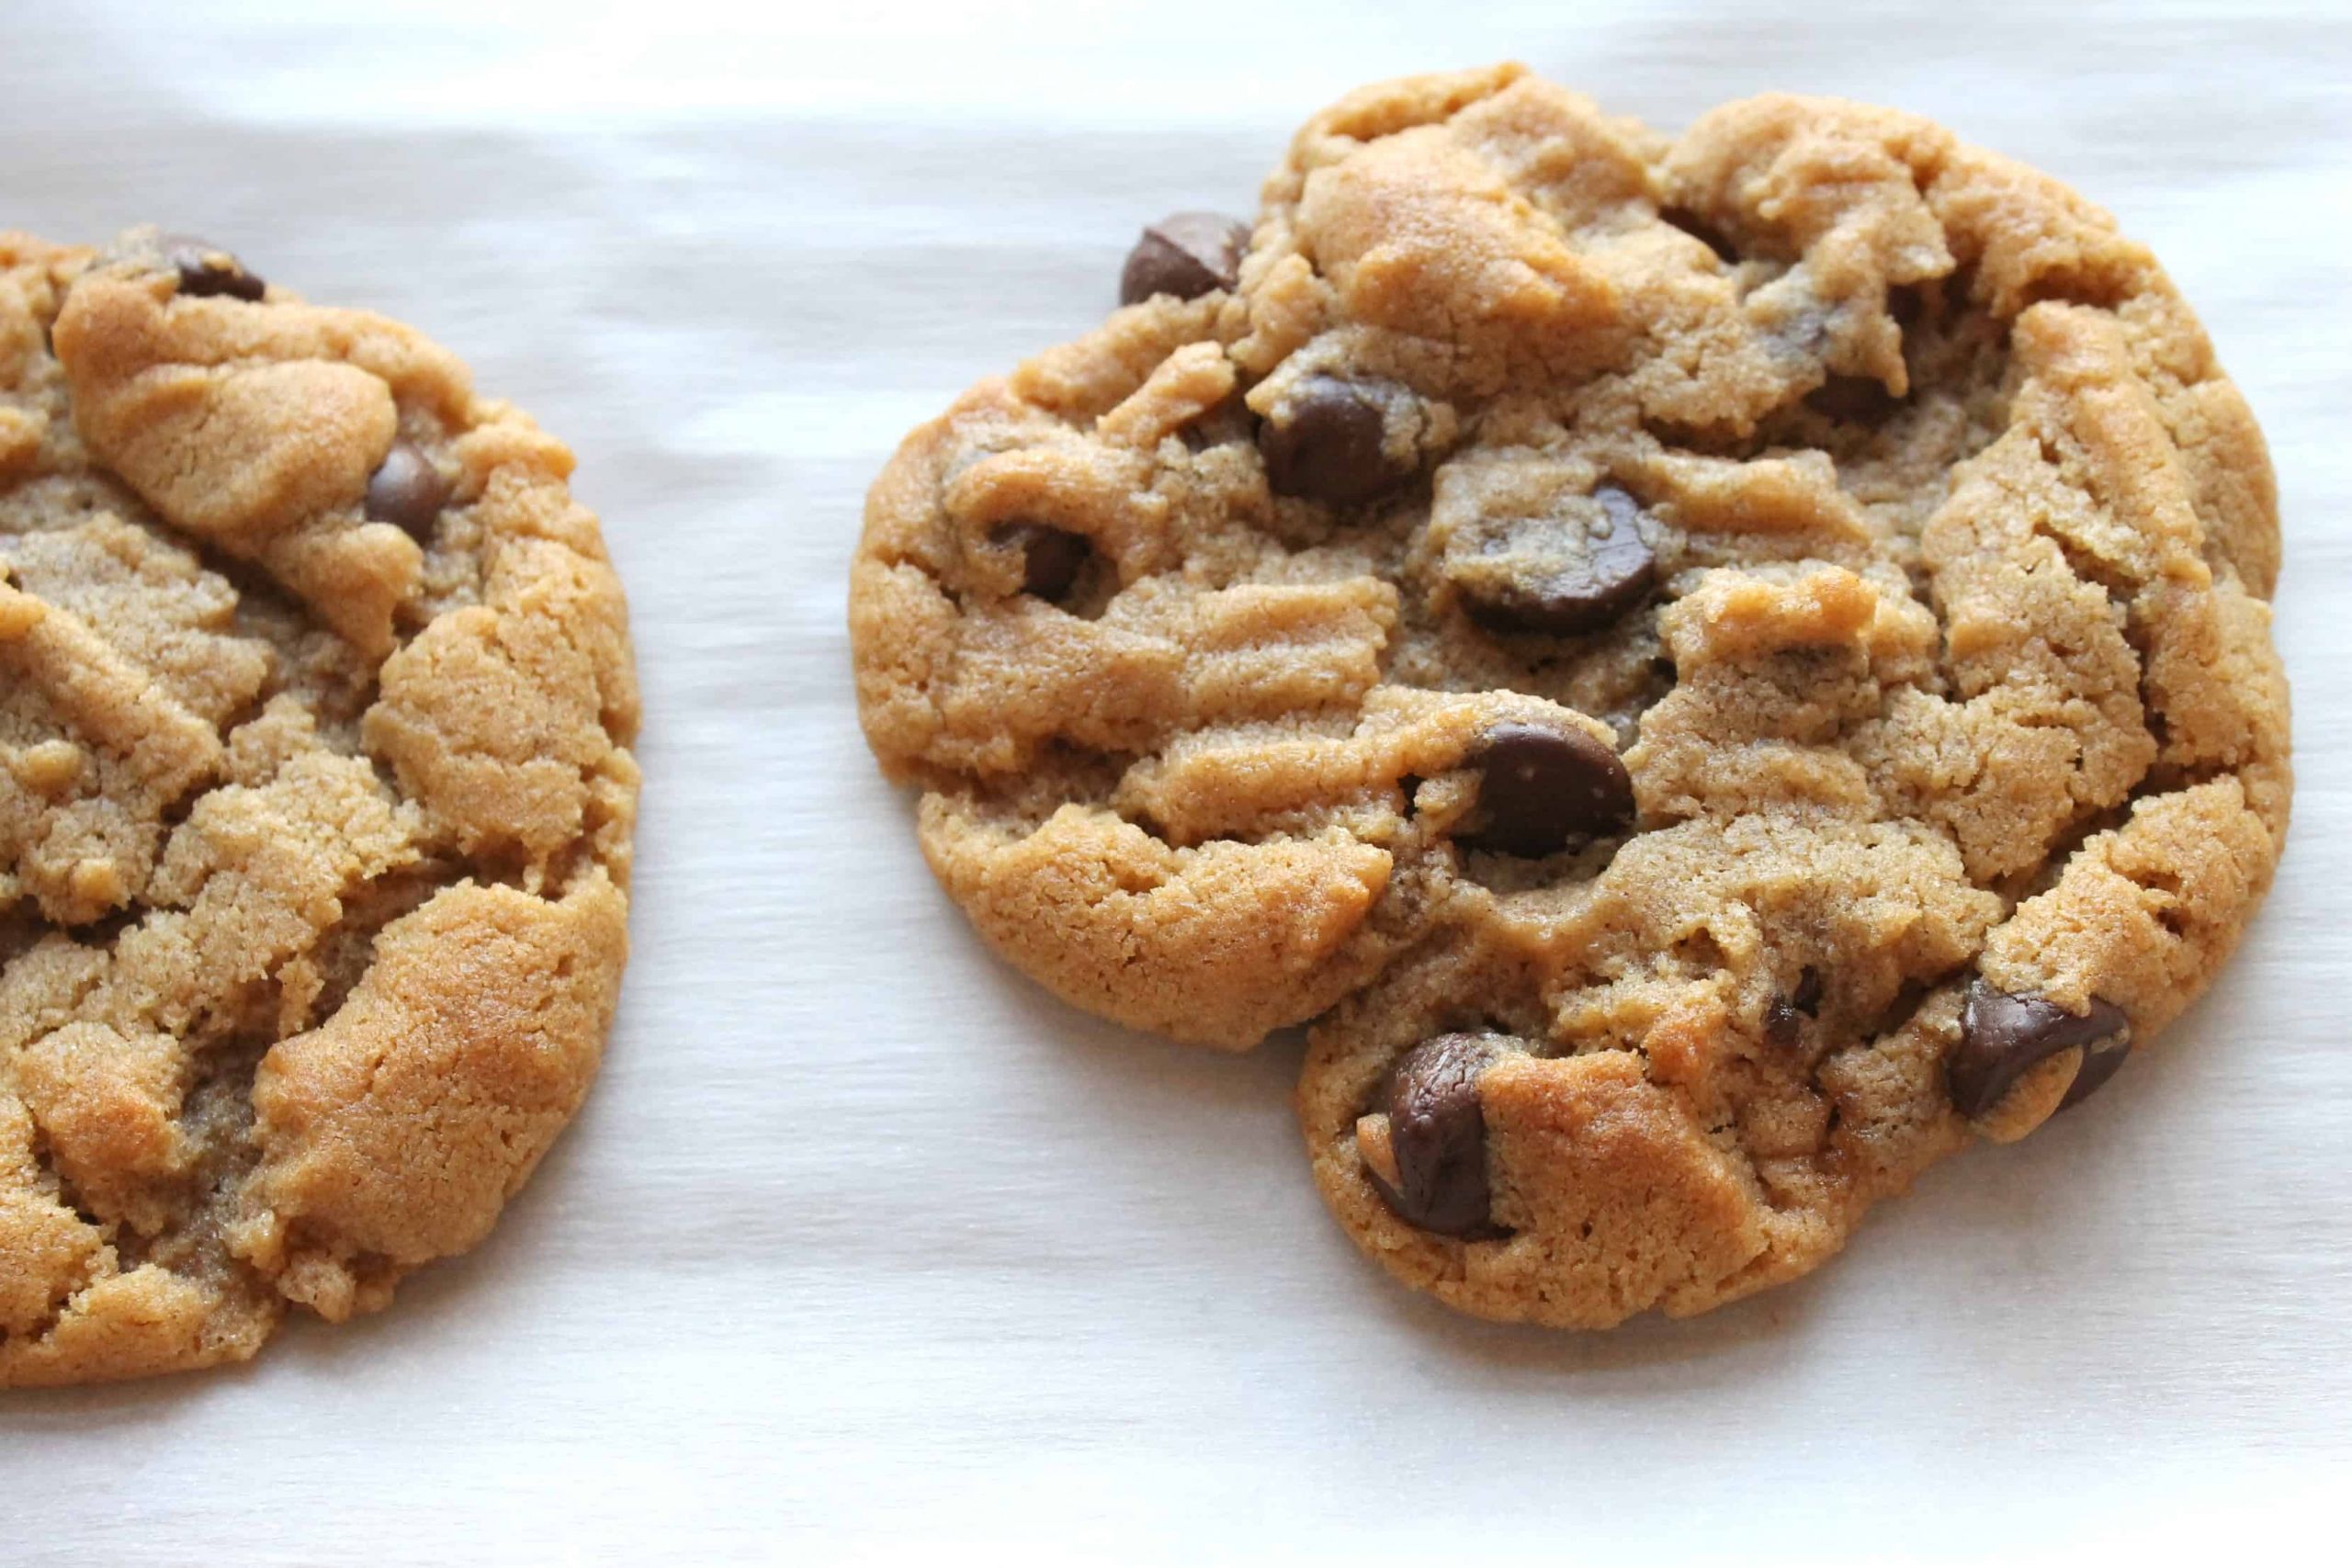 Soft Peanut Butter Chocolate Chip Cookies
 The Best Quick and Easy Peanut Butter Chocolate Chip